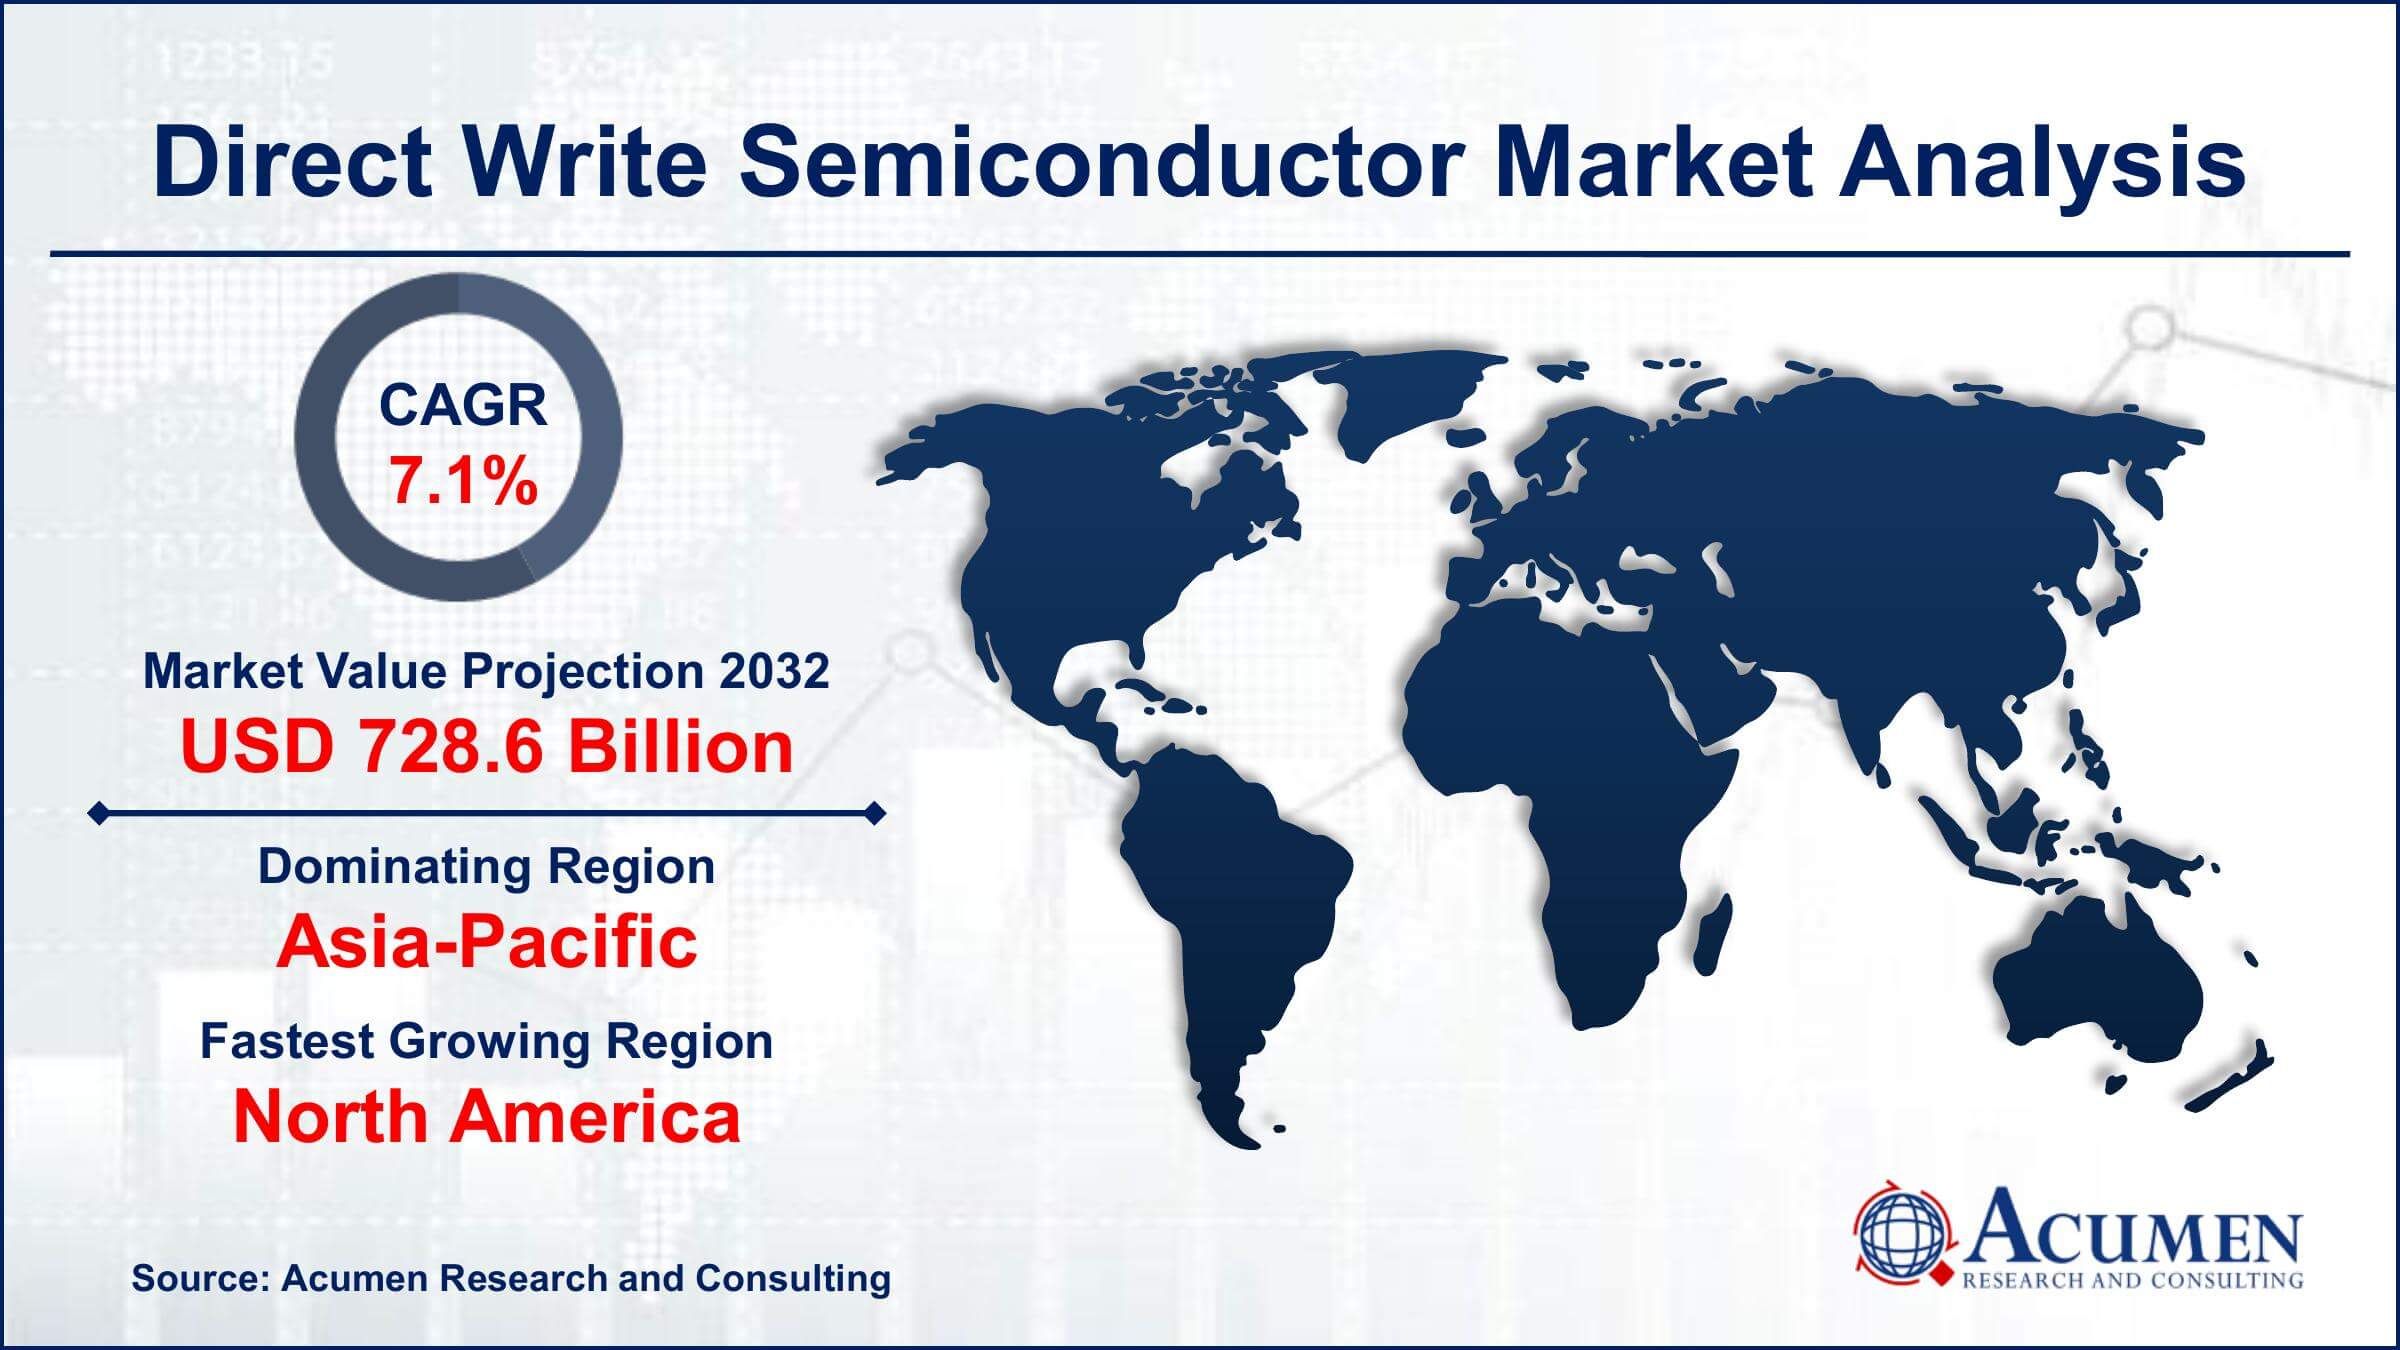 Direct Write Semiconductor Market Trends